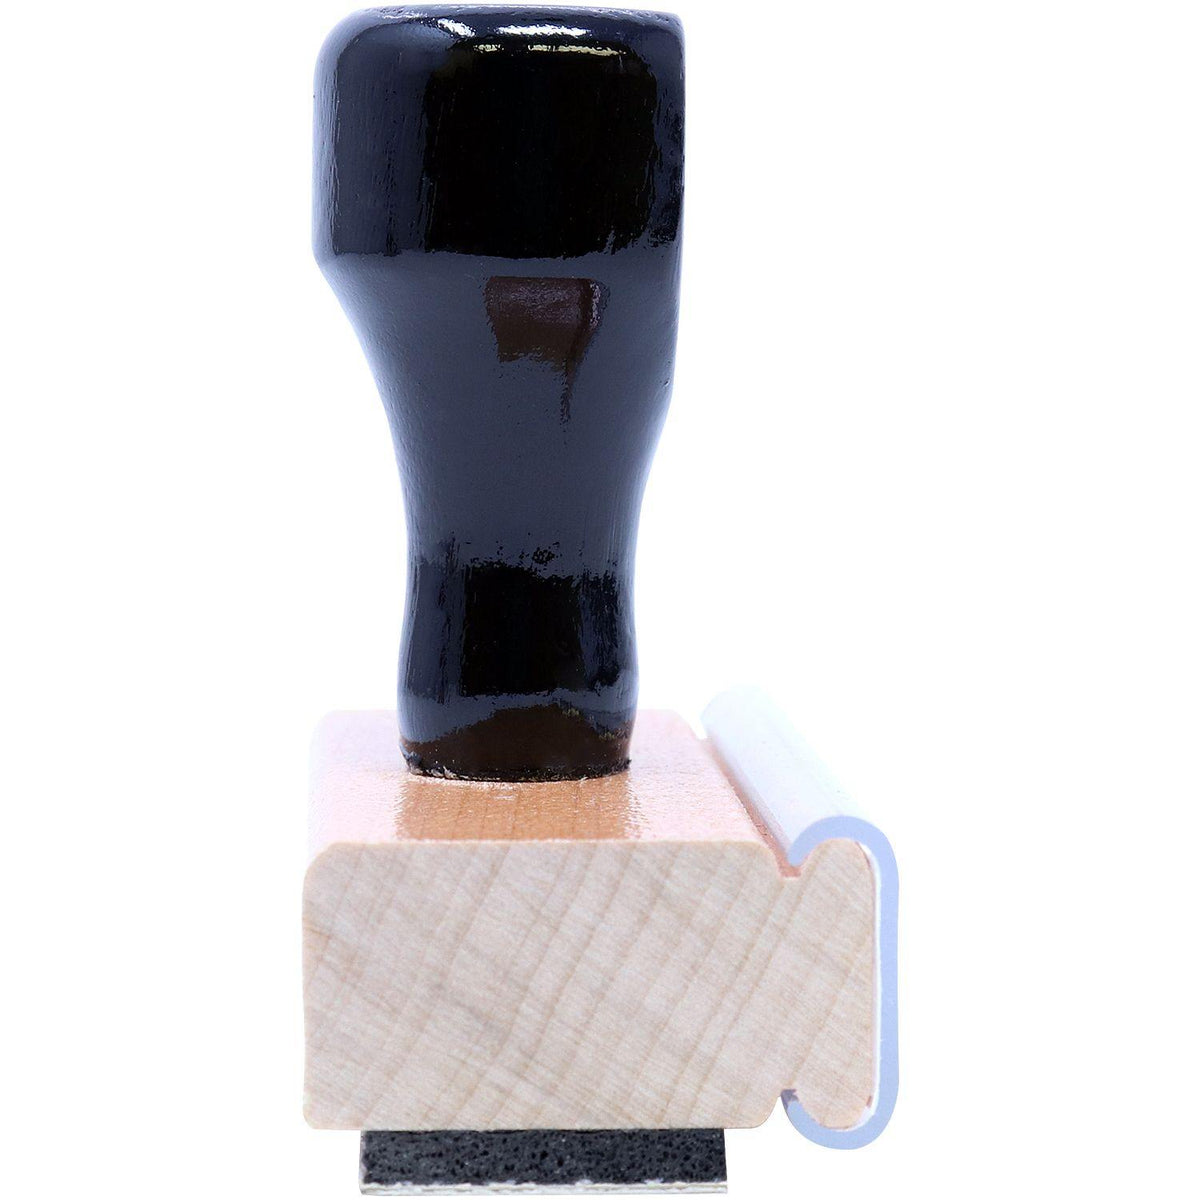 Round Faxed Rubber Stamp - Engineer Seal Stamps - Brand_Acorn, Impression Size_Small, Stamp Type_Regular Stamp, Type of Use_General, Type of Use_Office